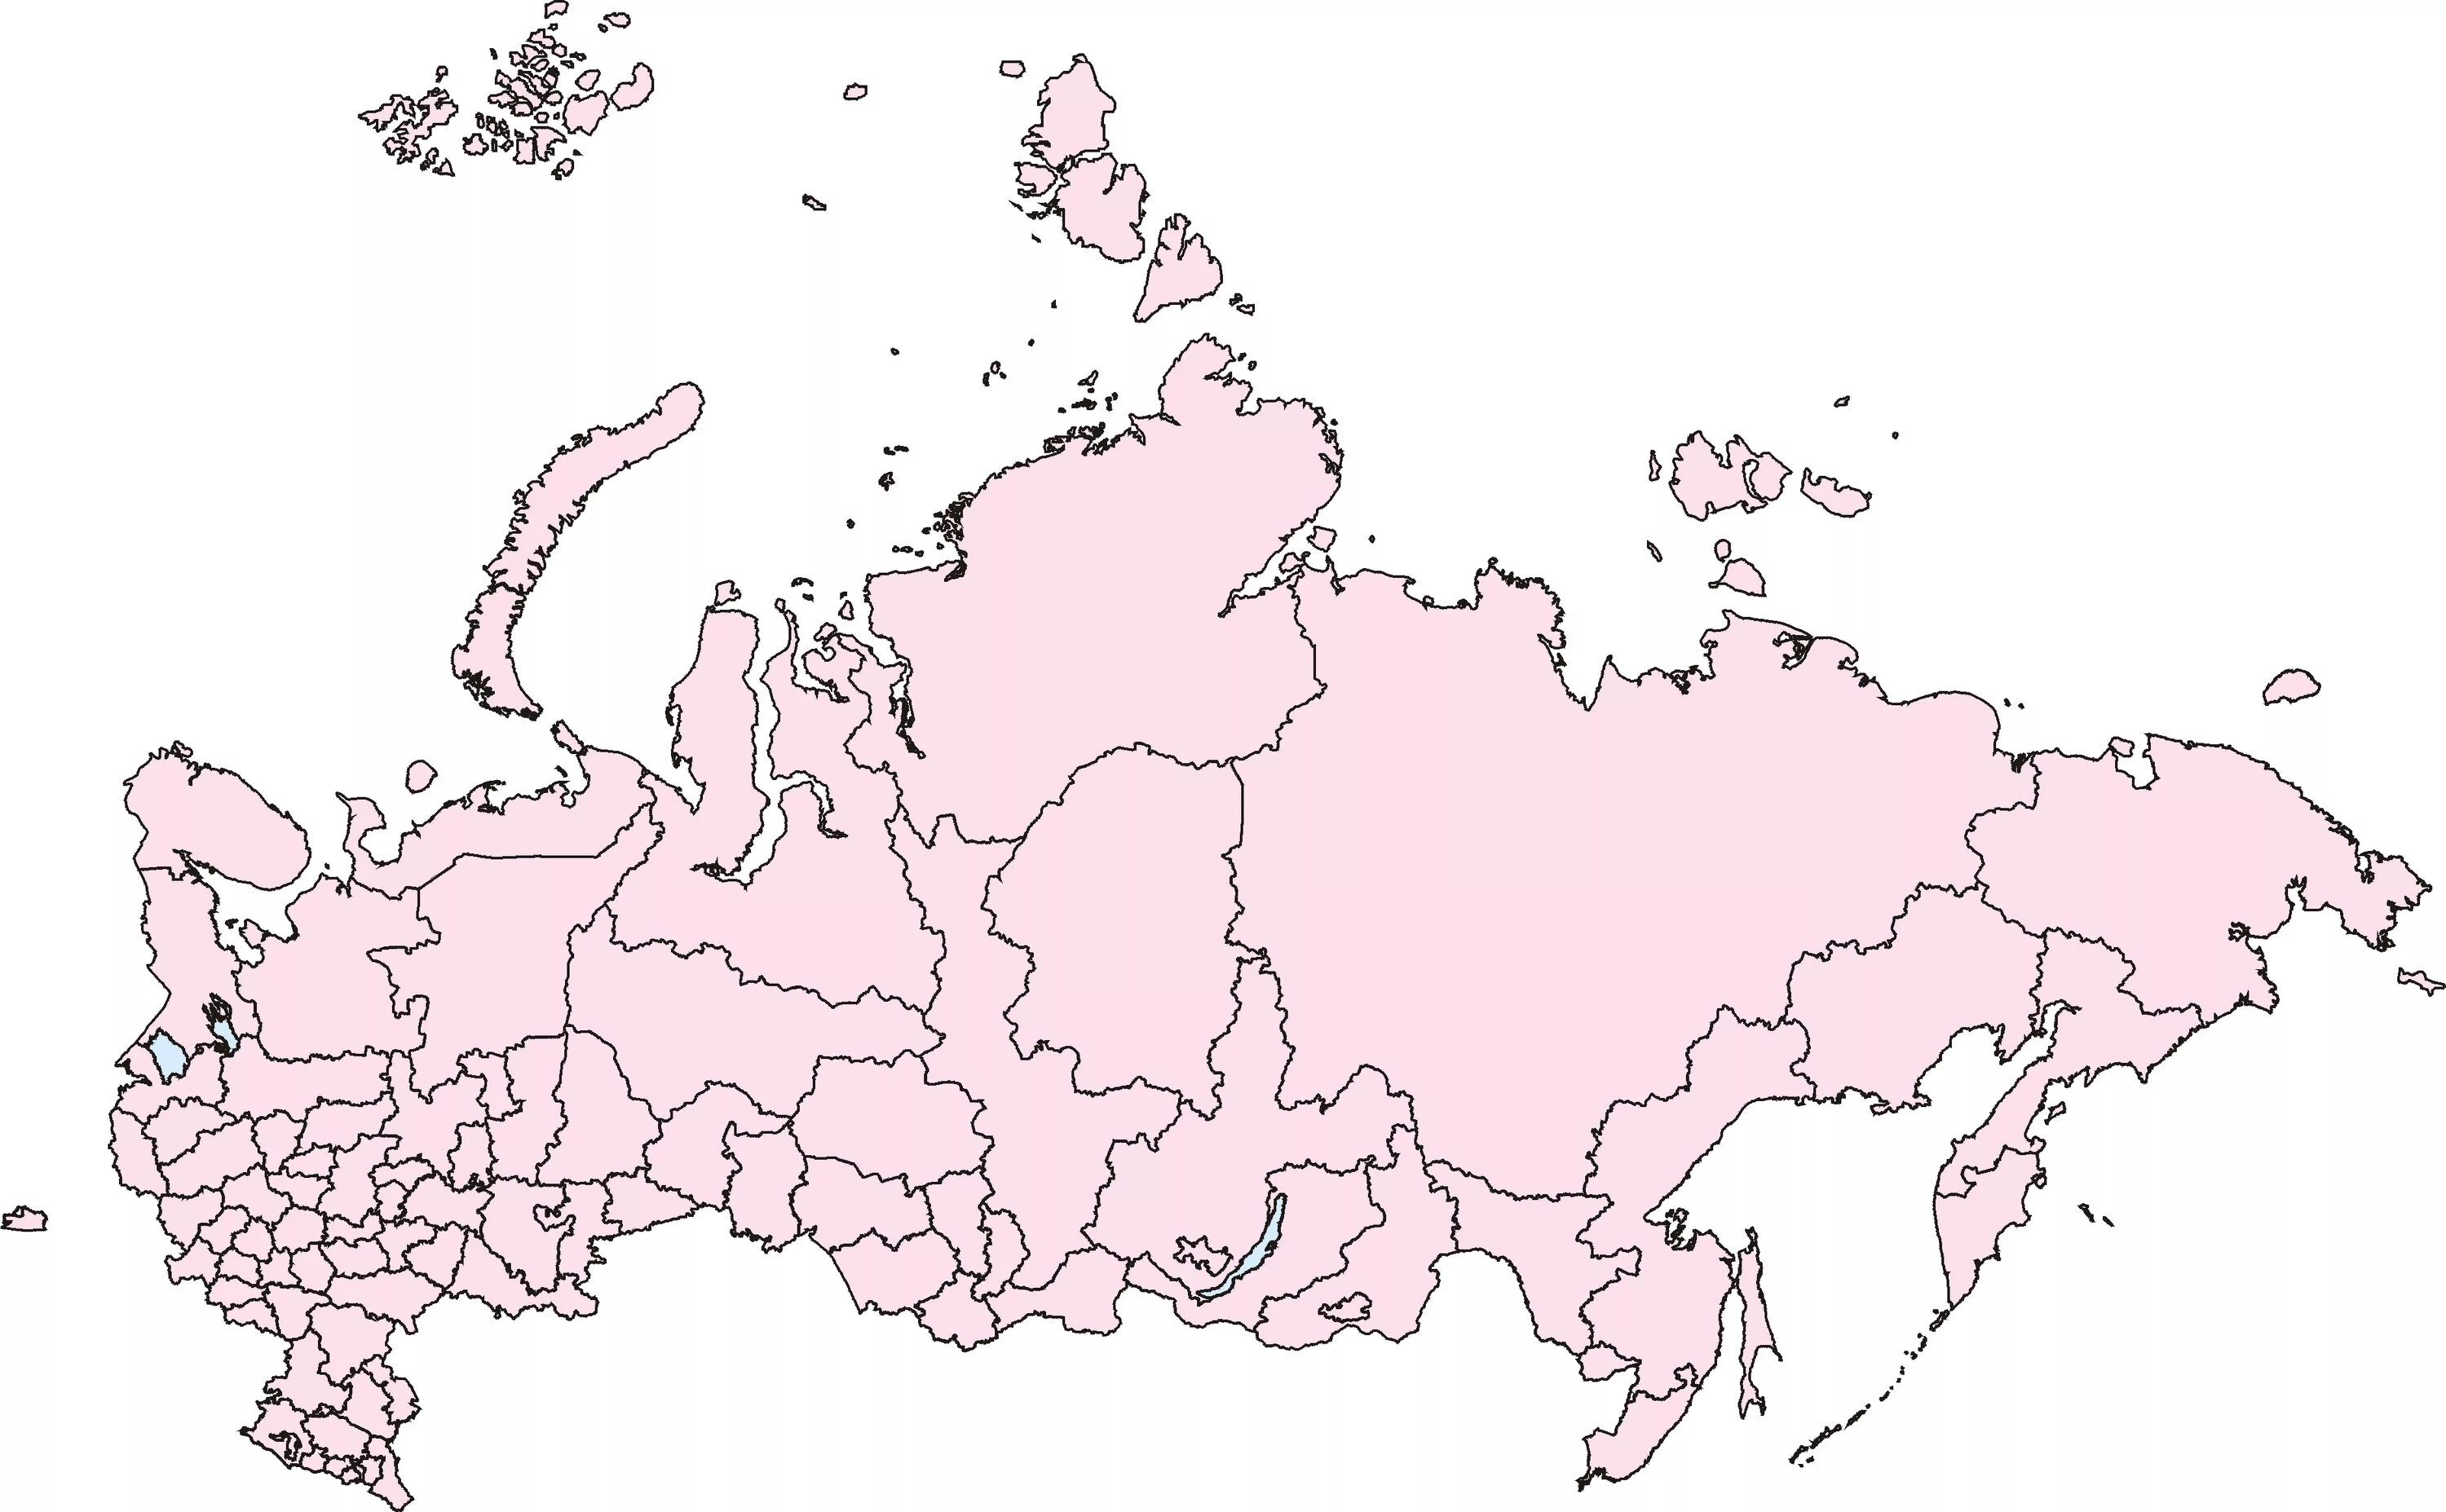 An animated map of the Russian Empire coloring book